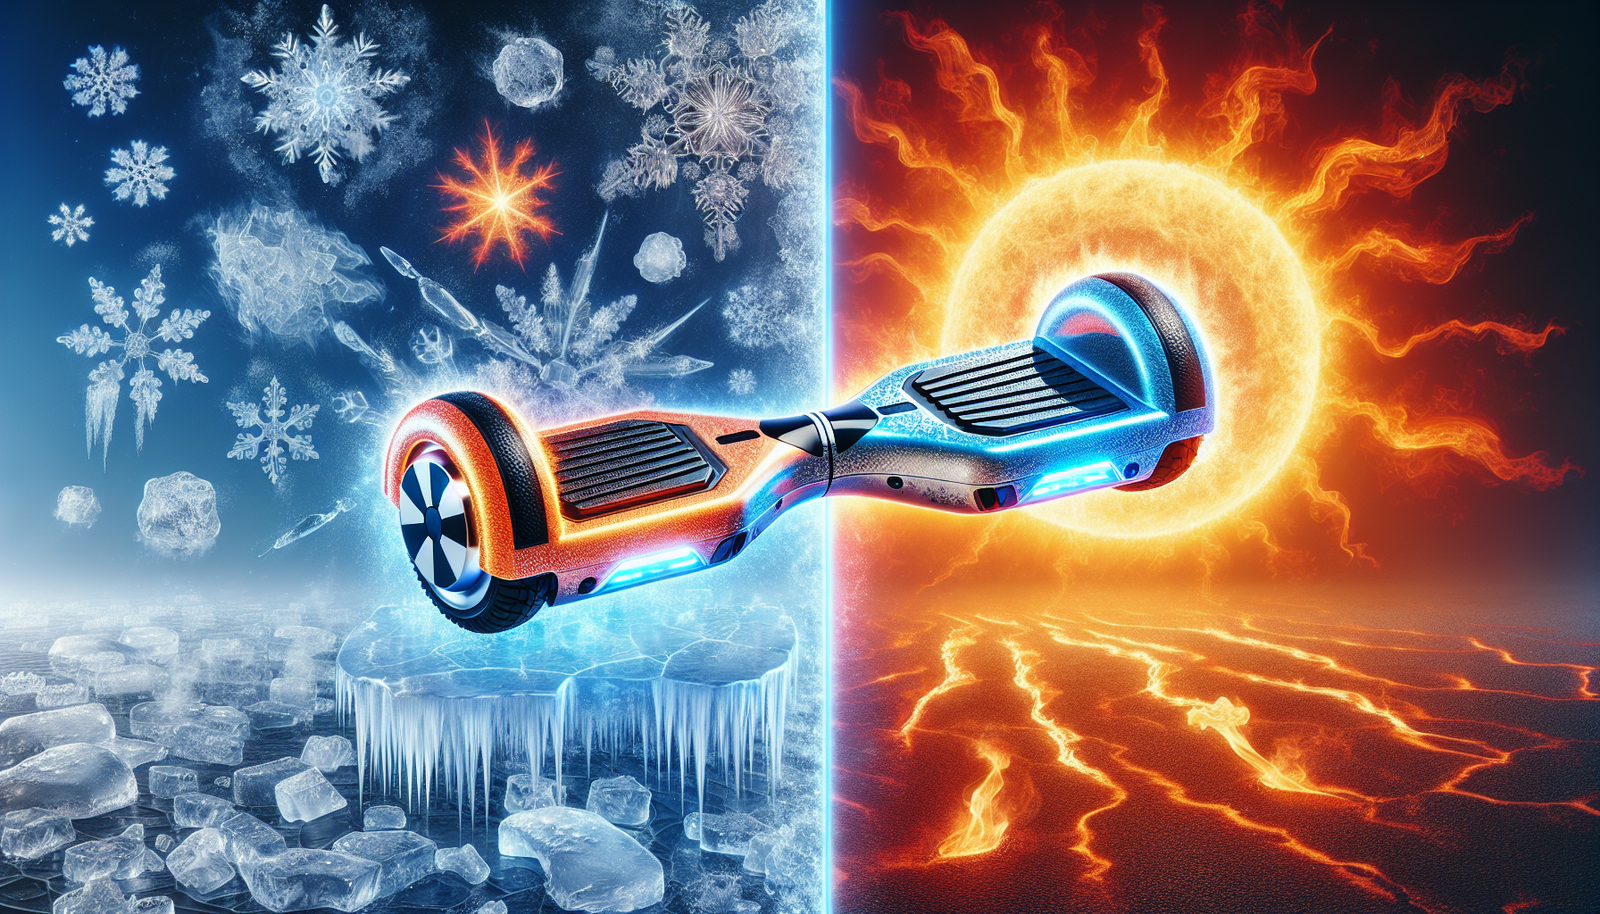 What Is The Ideal Temperature Range For Operating A Hoverboard?